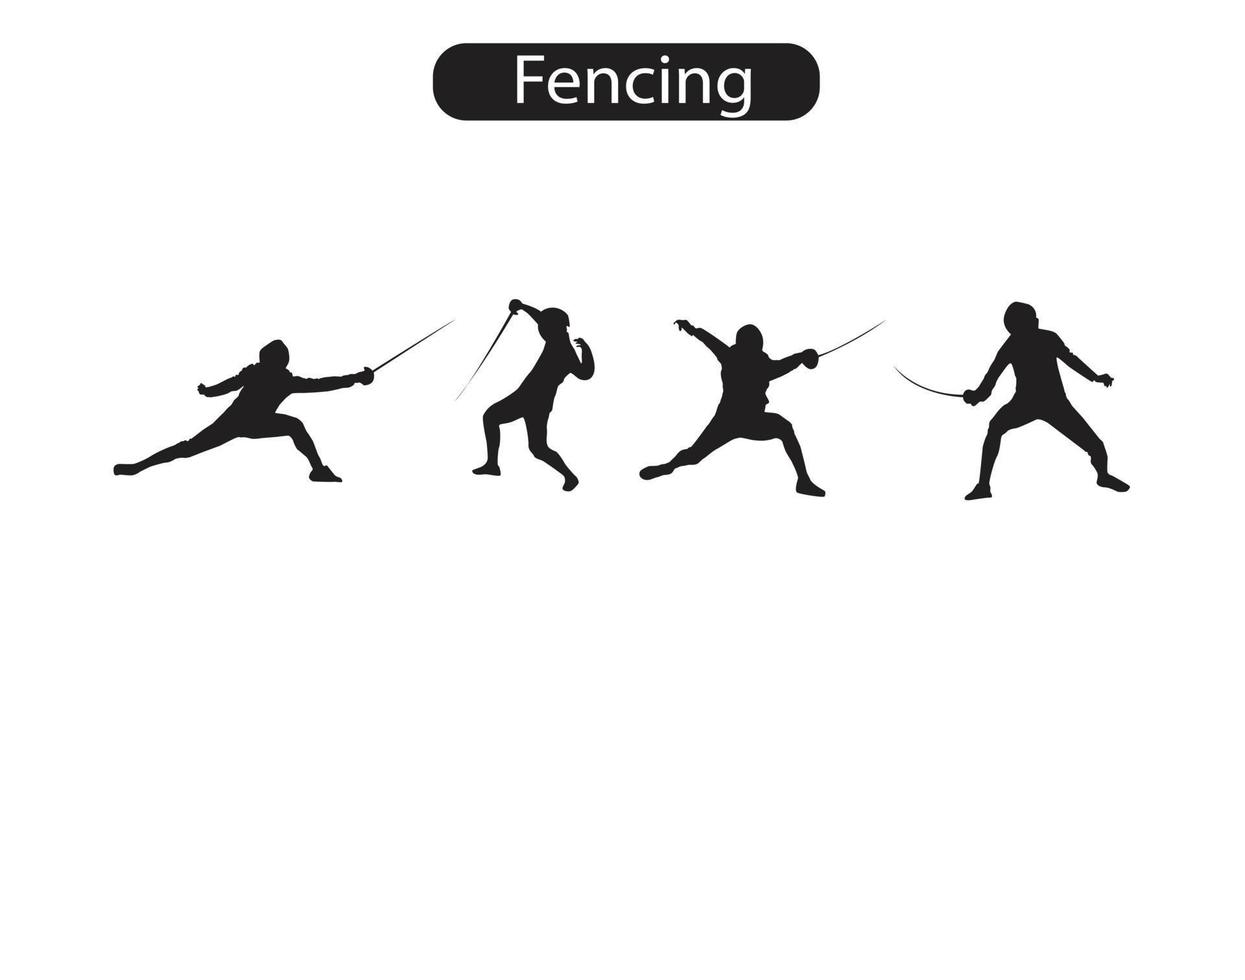 Fencing Game Players Silhouette Icons Vector Illustration